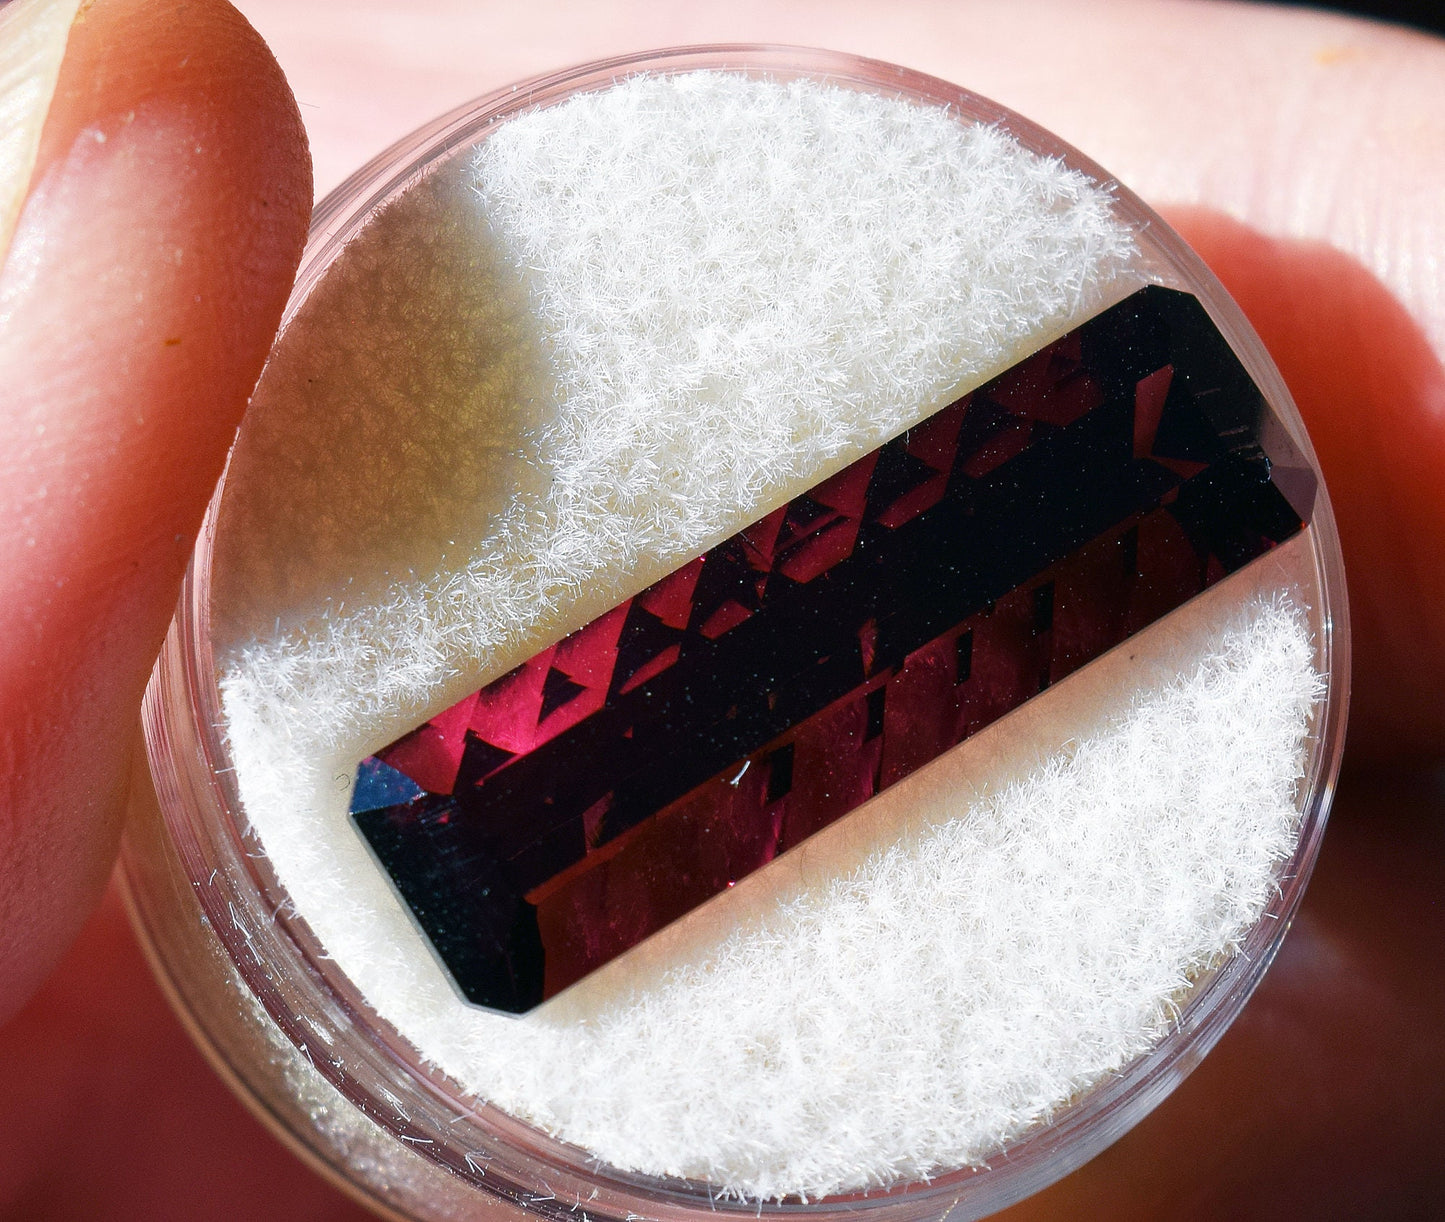 Rare red Tourmaline (Rubellite) from Nigeria.  Concave cut masterpiece.  5.68 carats of heaven!